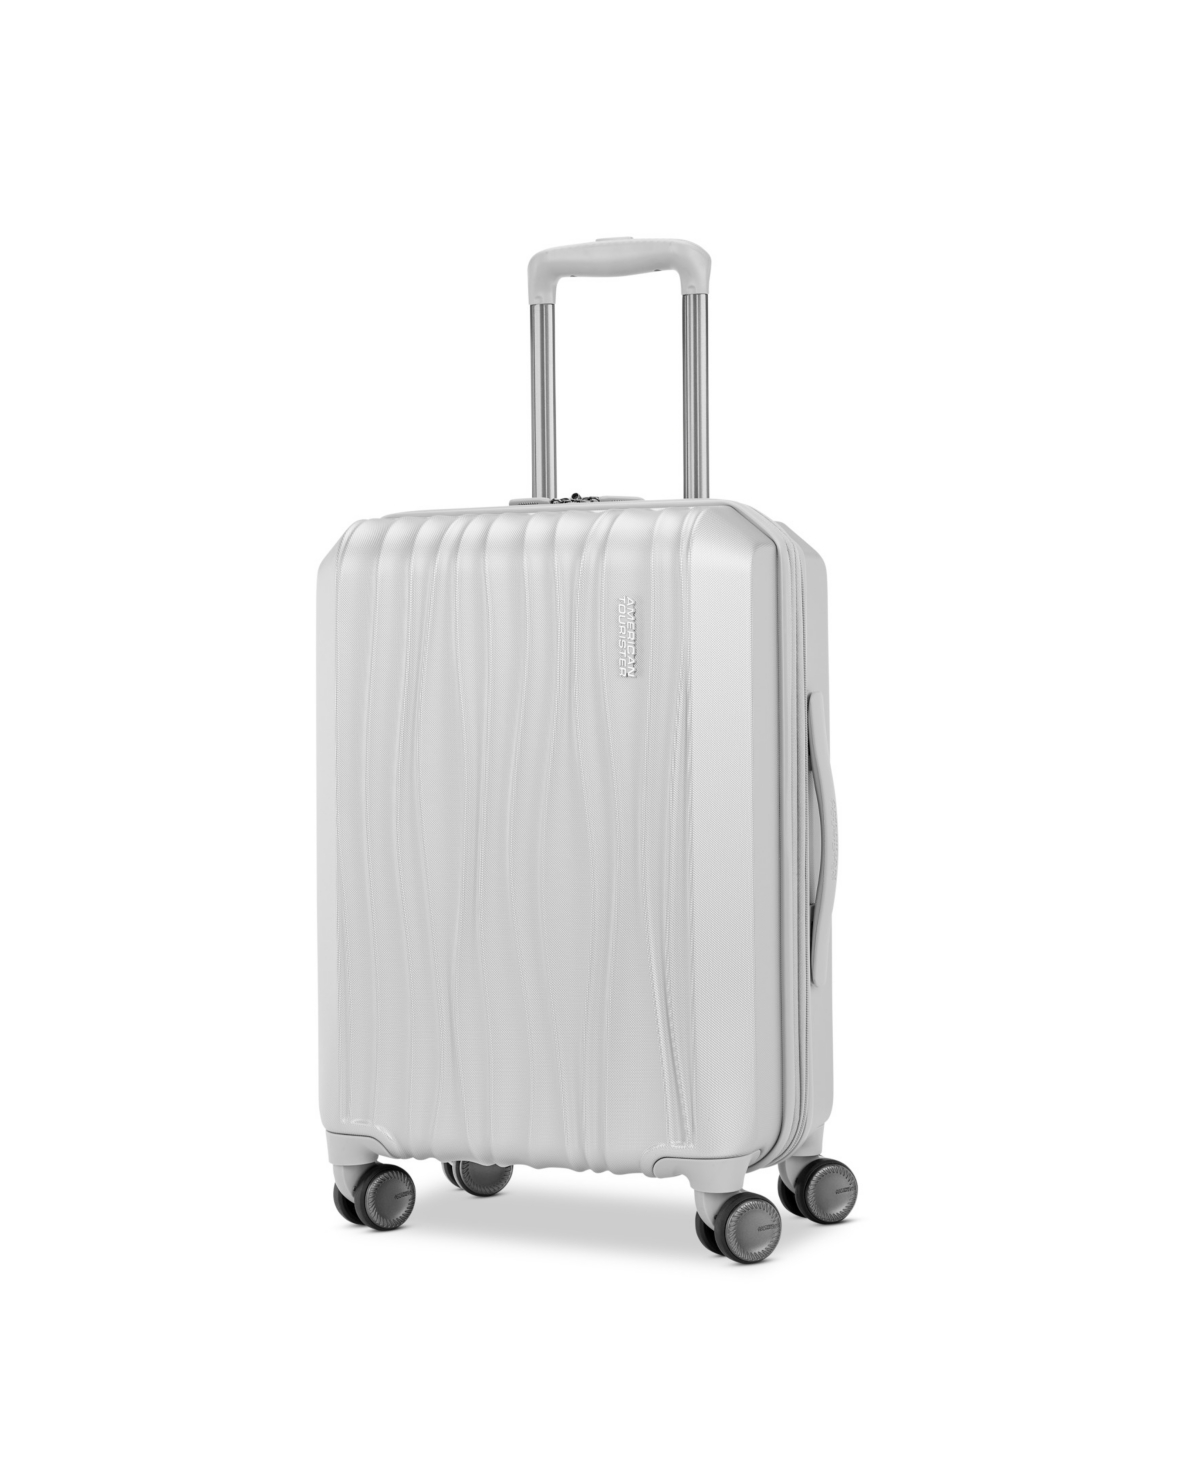 Tribute Encore Hardside Carry On 20" Spinner Luggage - Soft Coral